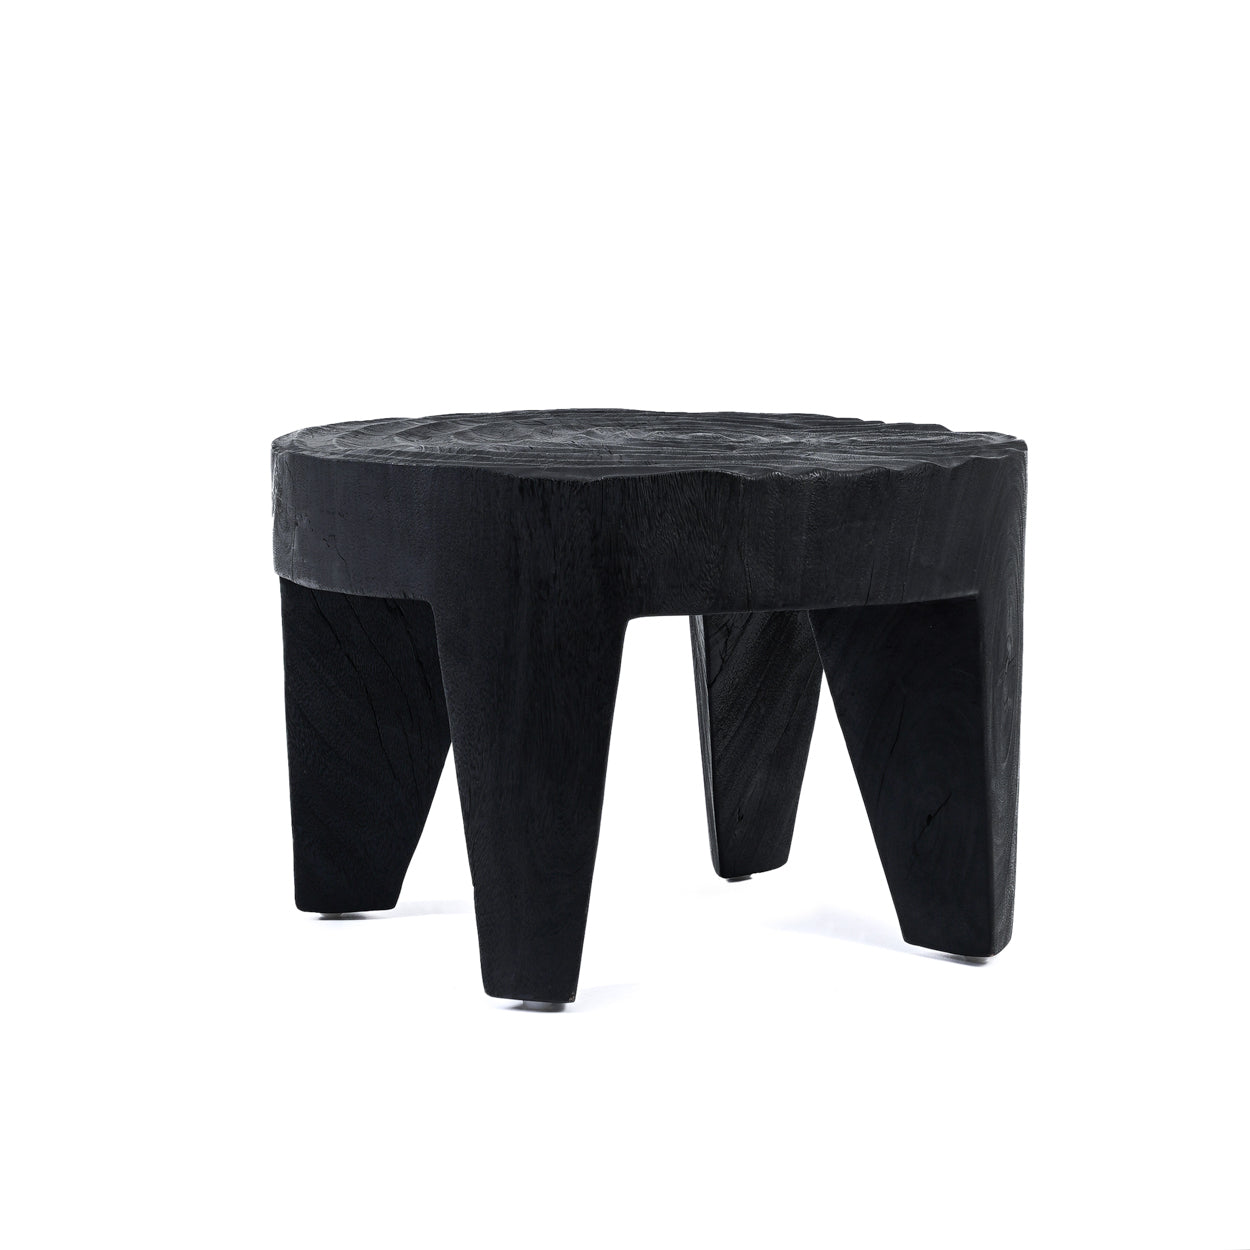 The MADERO Coffee Table - Black